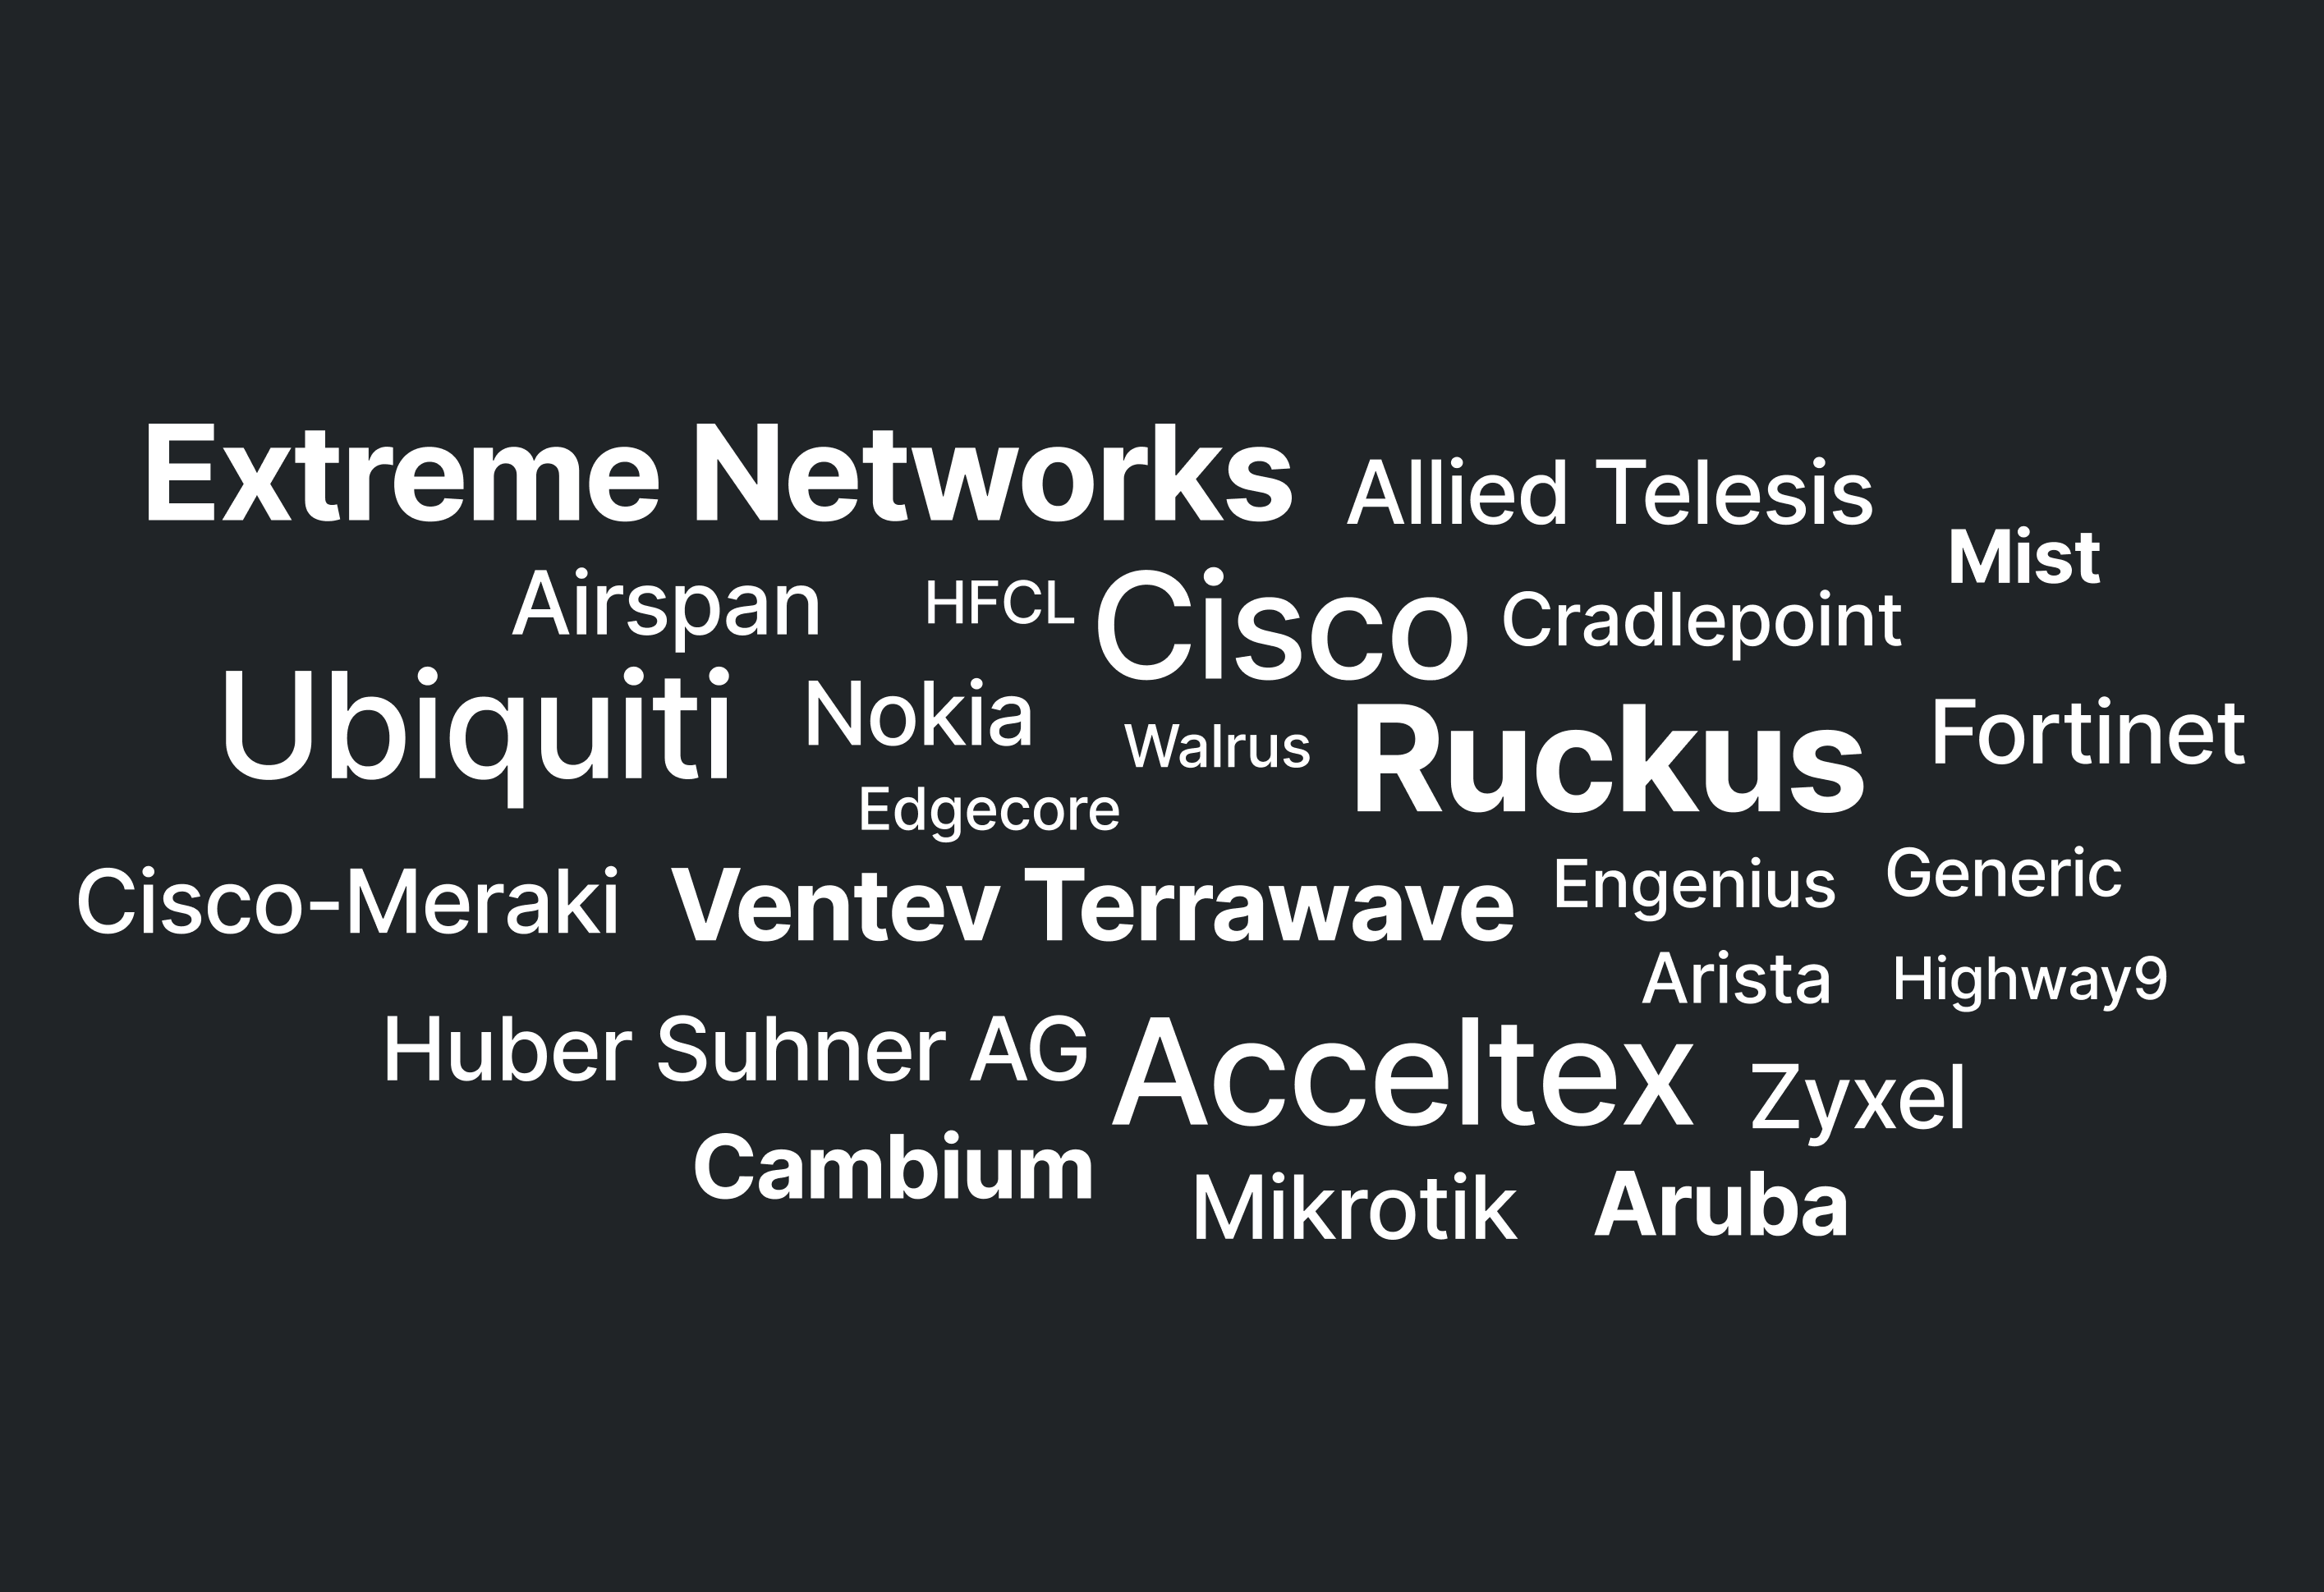 Access point brands